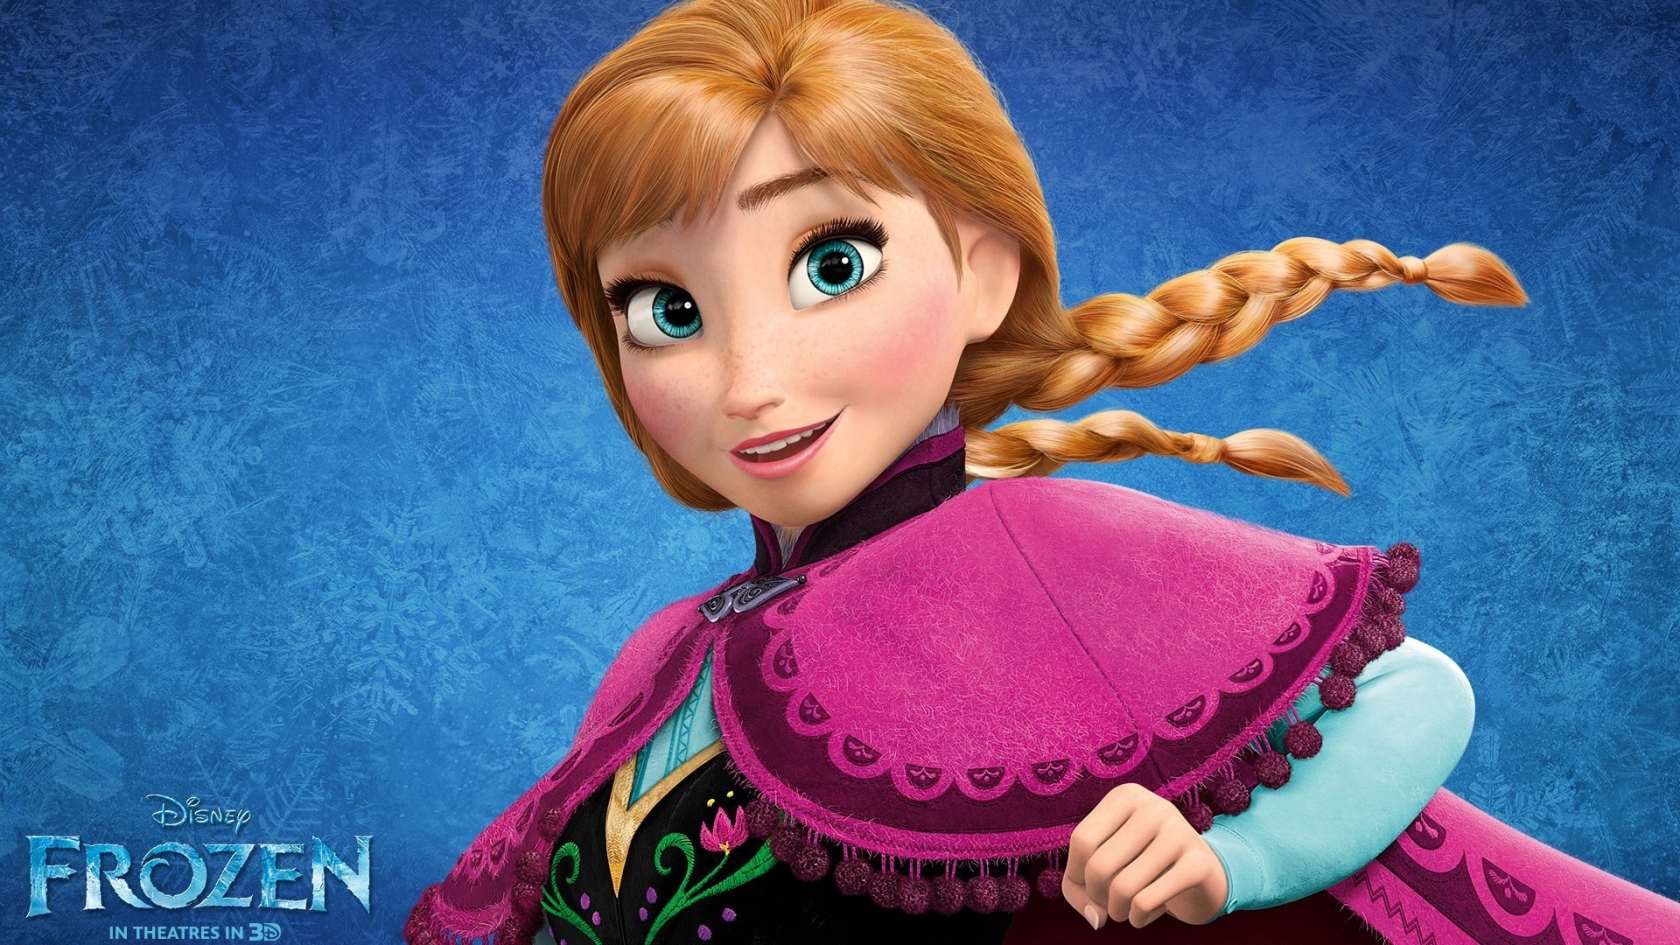 Frozen Movie Character for 1680 x 945 HDTV resolution